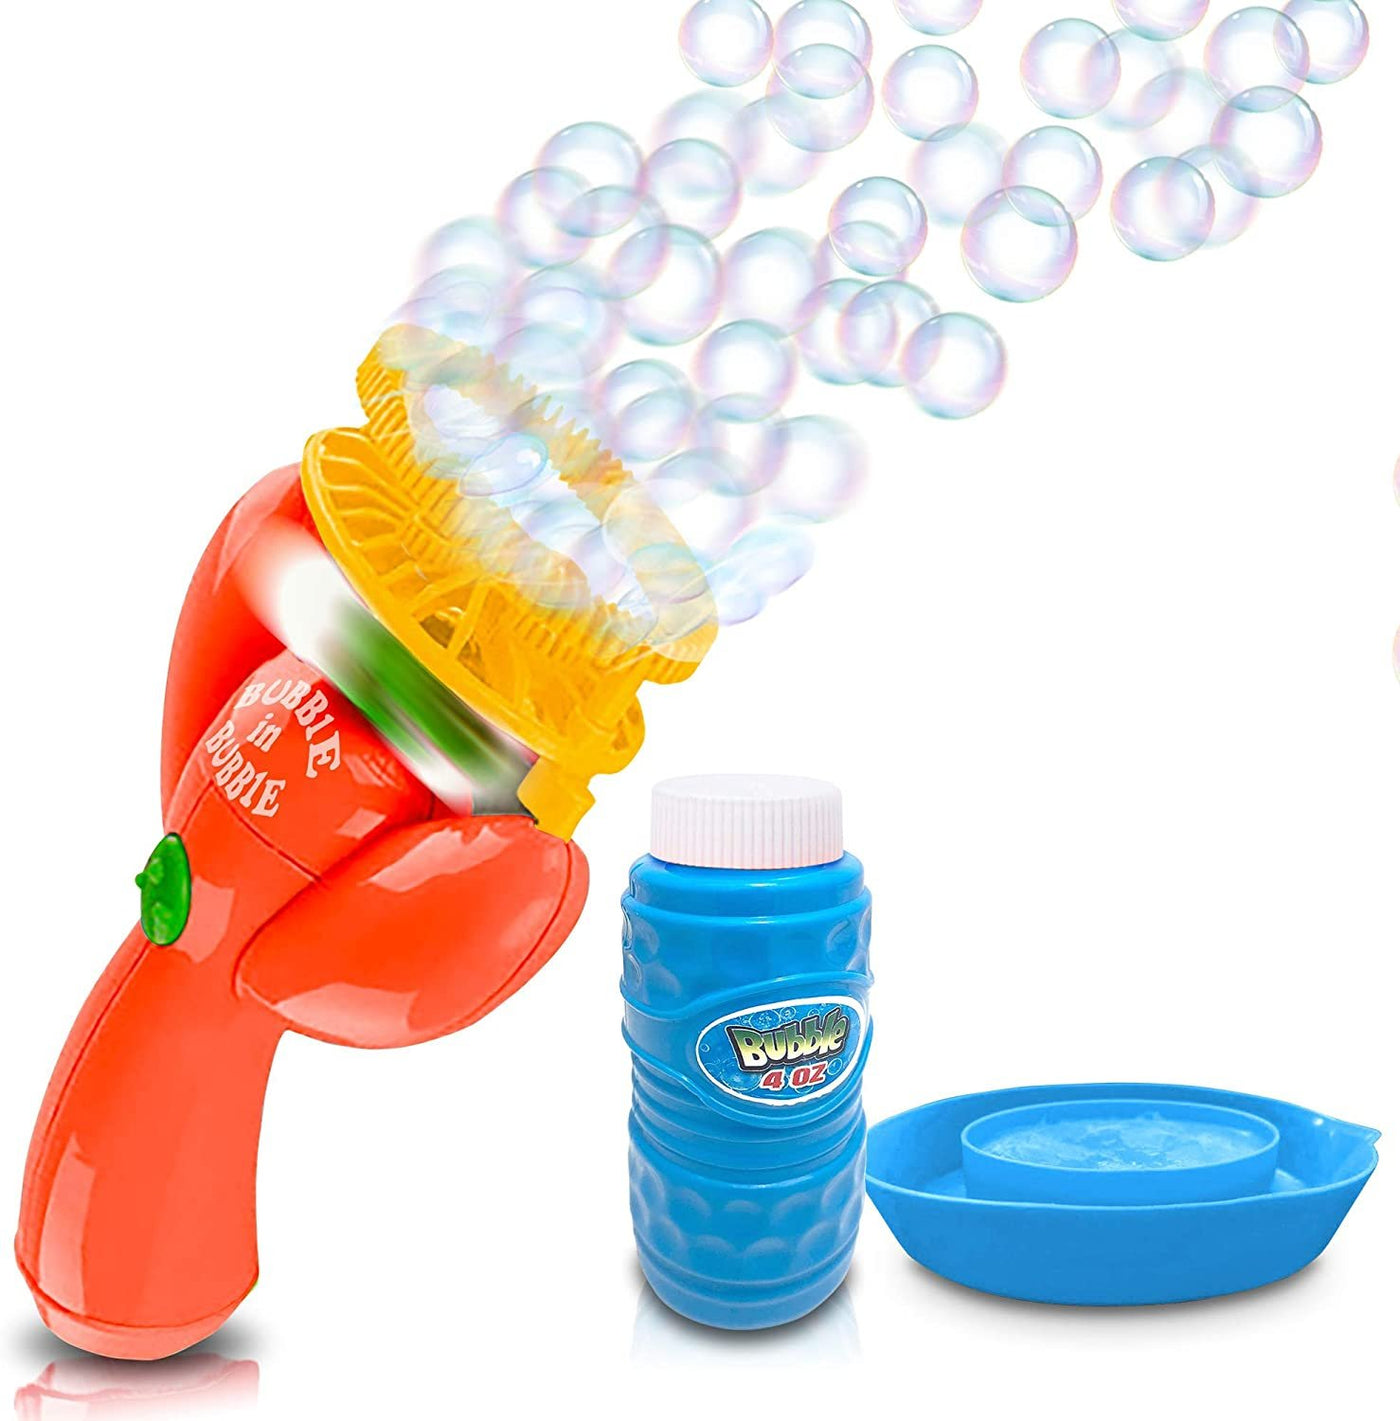 Double Bubble Blower Fan - Battery-Operated Bubbles Blaster - 4 oz Solution and Dipping Tray Included - Fun Bubble Shooter for Boys and Girls, Great Outdoor Summer Game - Orange